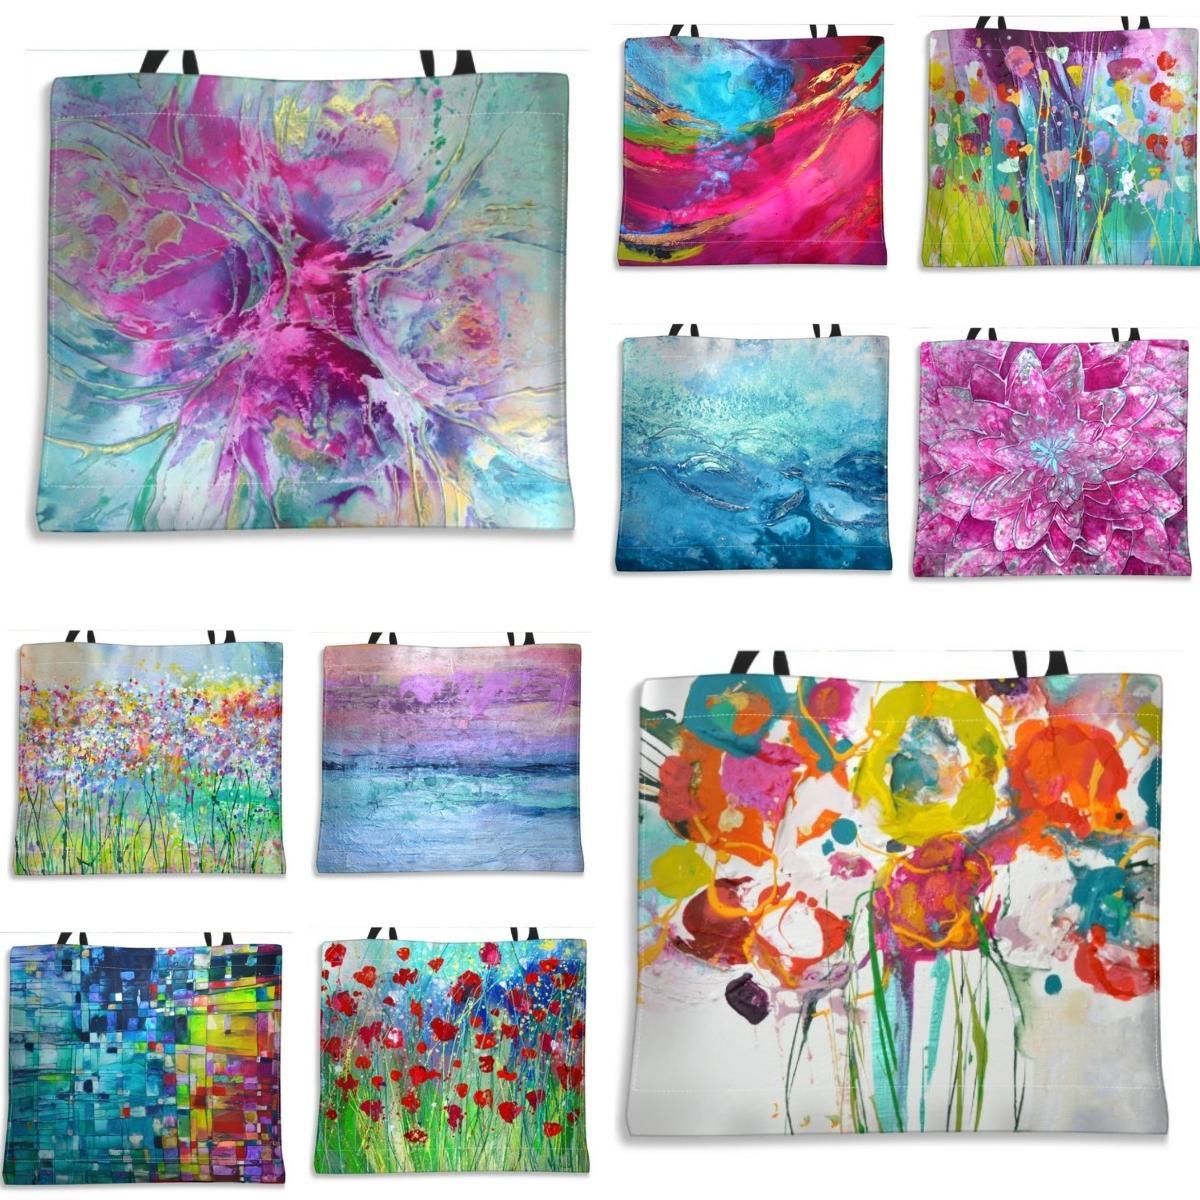 Large Canvas Shopping Tote Bags